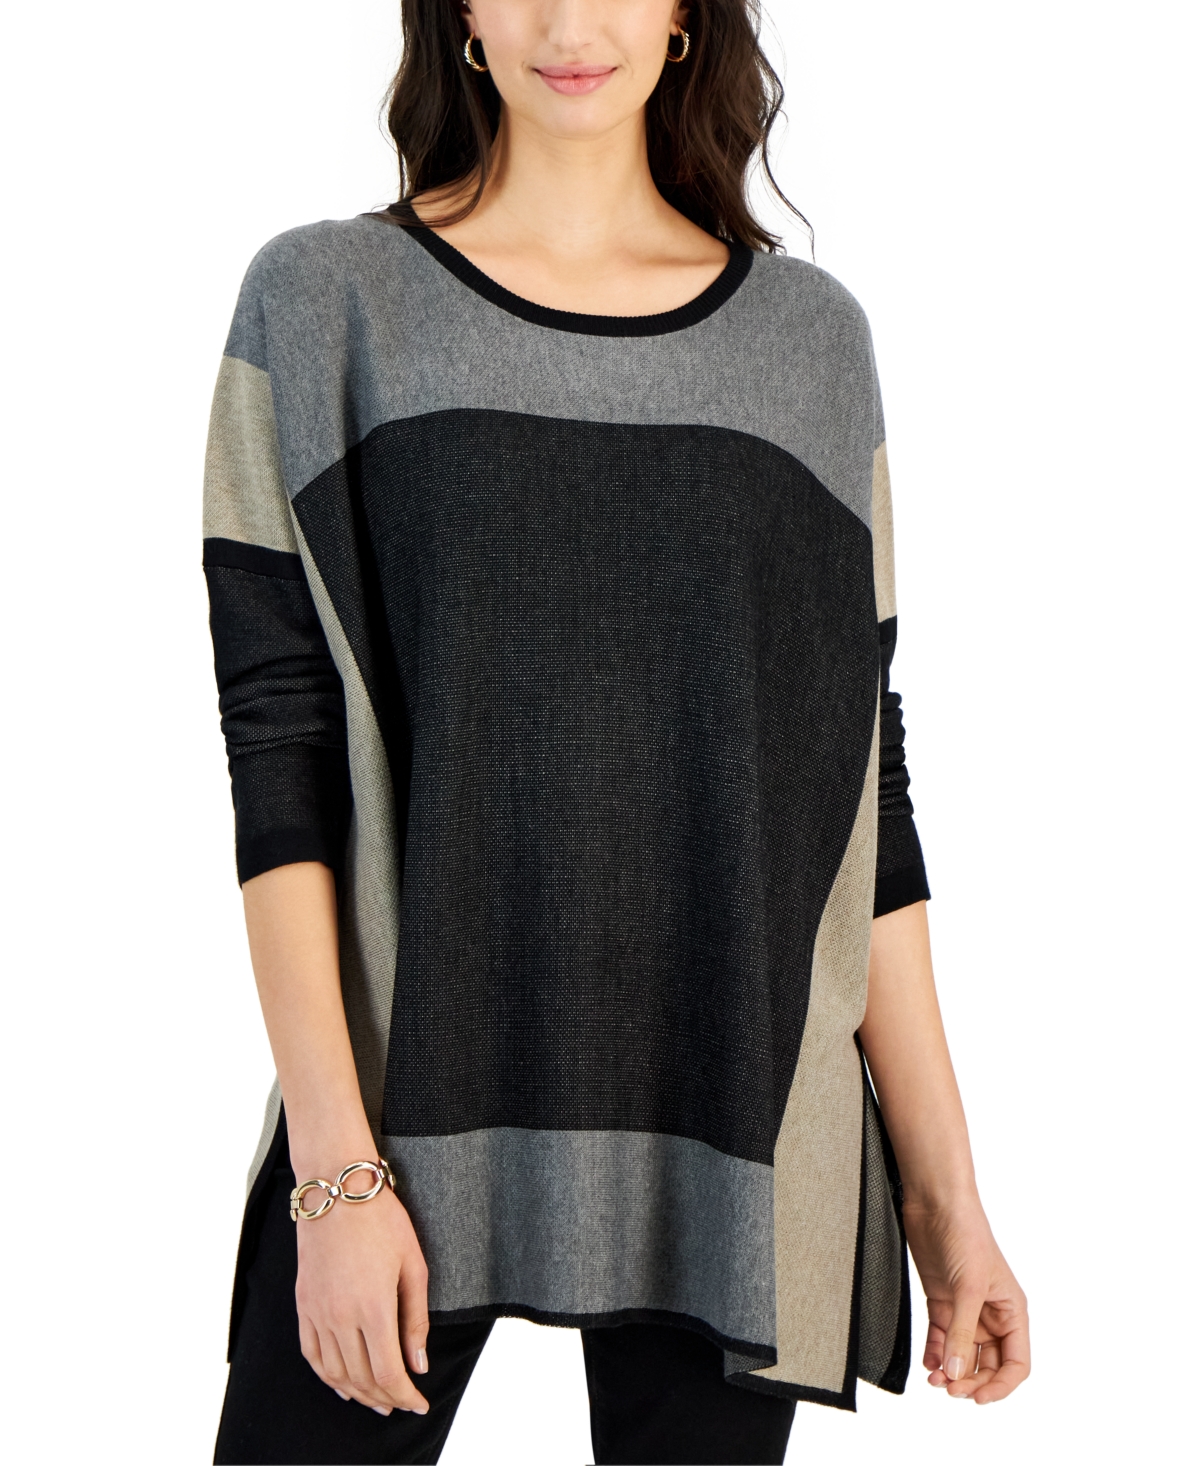 Fever Women's Crewneck Colorblocked Poncho Sweater In Black  Charcoal Grey